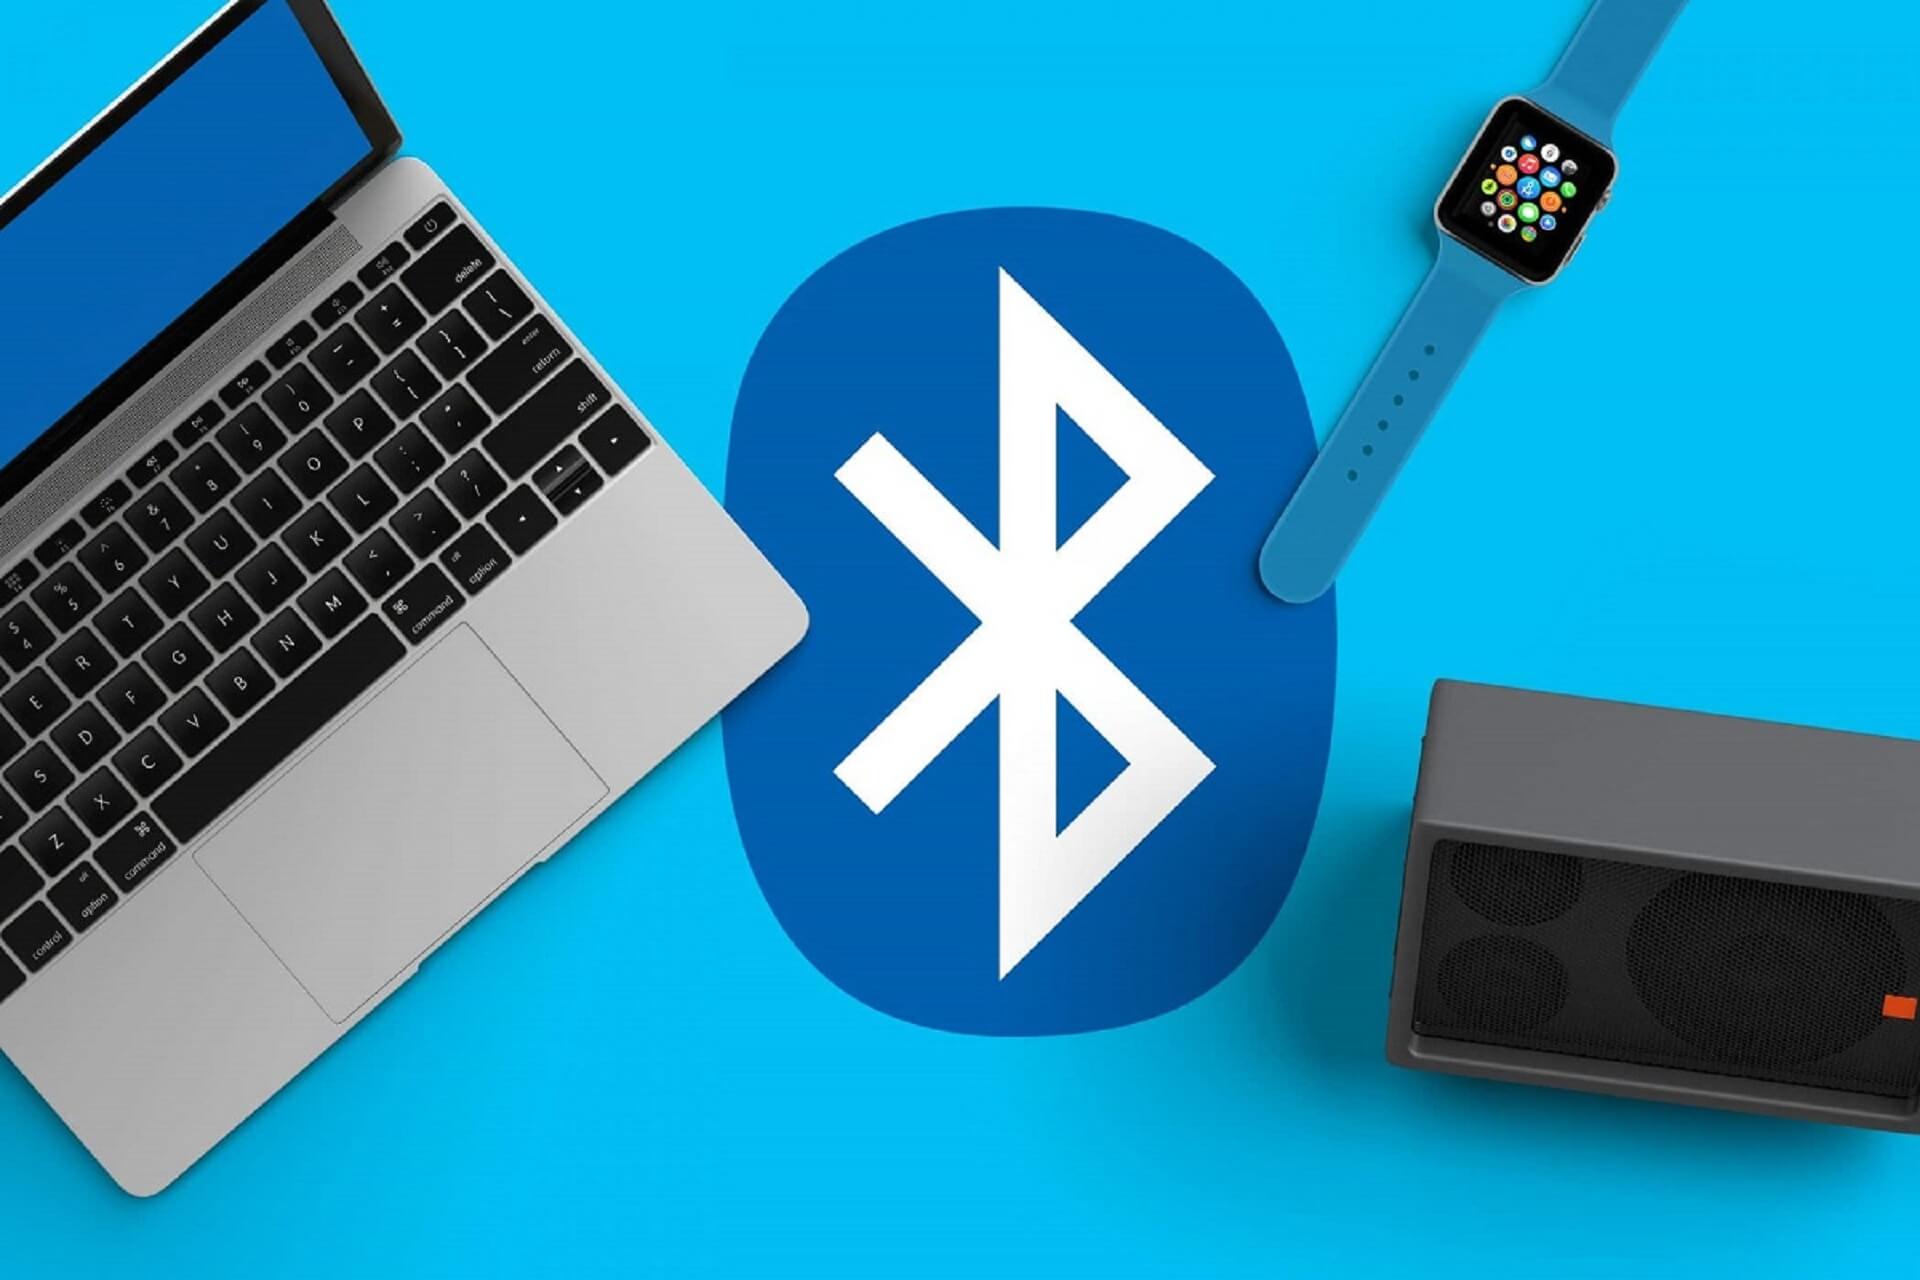 can't start the Bluetooth stack service